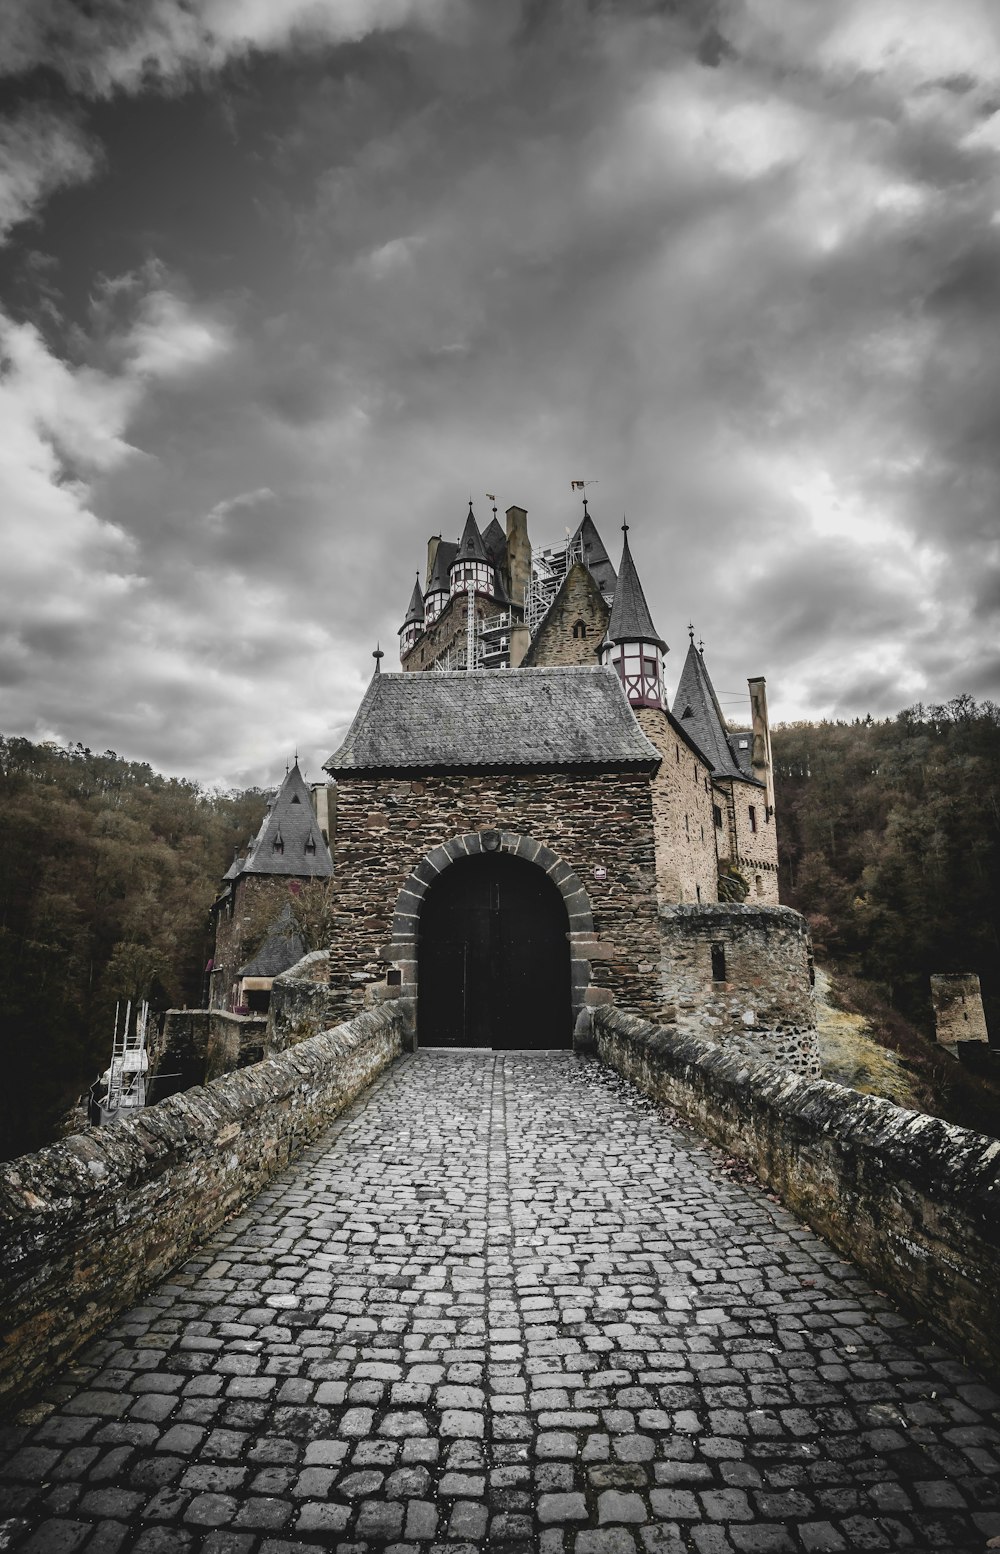 a stone walkway leading to a castle under a cloudy sky